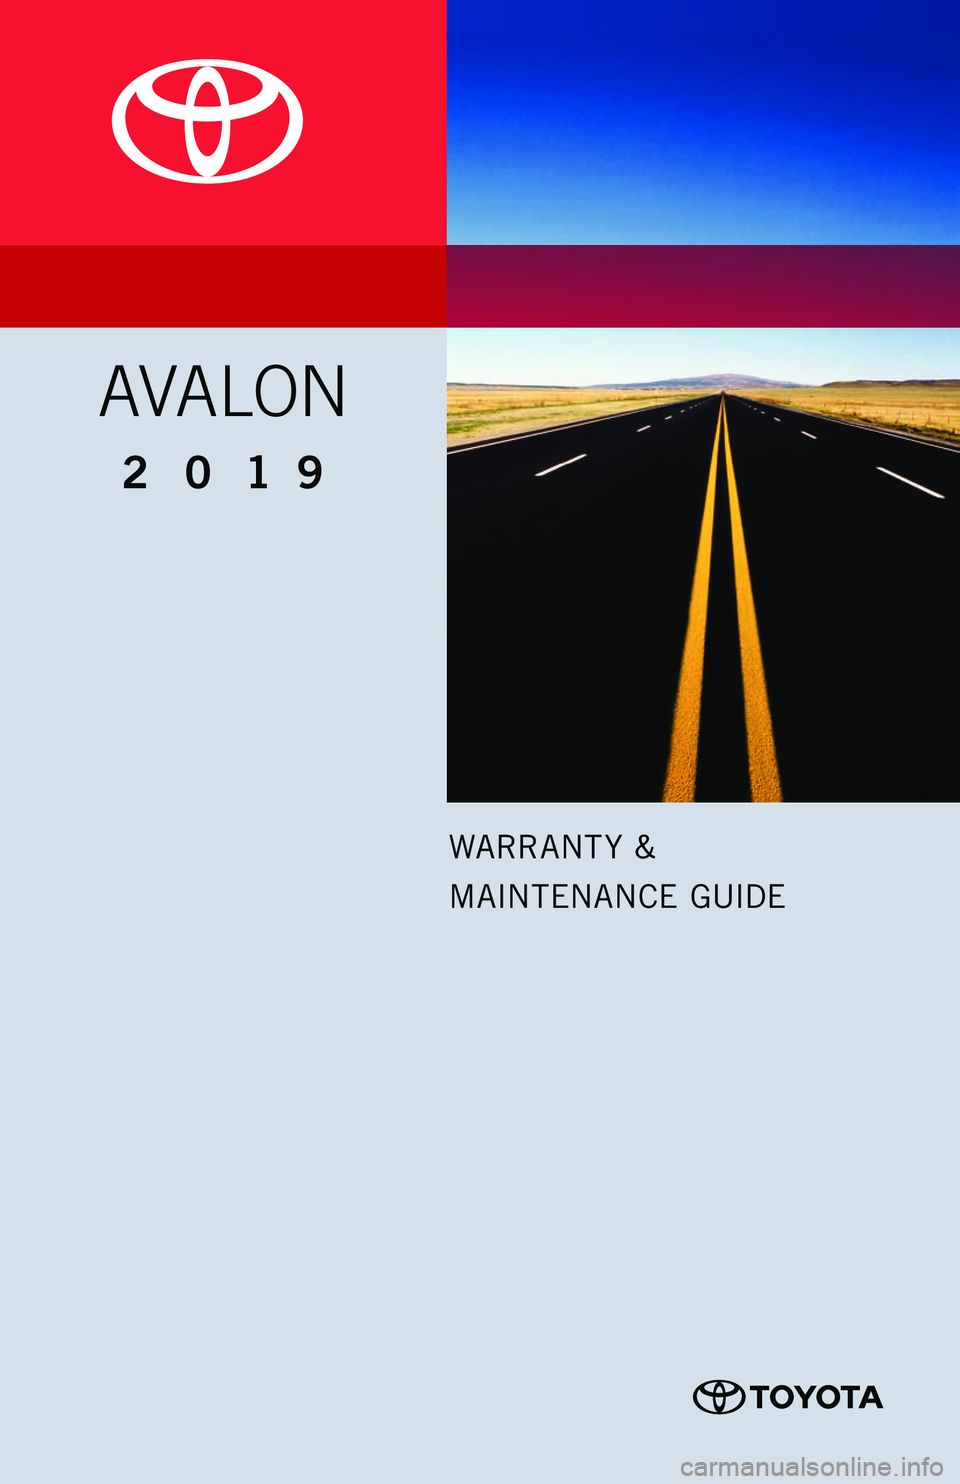 TOYOTA AVALON 2019  Warranties & Maintenance Guides (in English) WARRANT Y &
MAINTENANCE  GUIDE
AVALON
2 0 1 9       
112283_18-TCS-11410_WMG_MY19Avalon_COVER_3_1F_lm_R1.indd   33/19/18   9:48 PM 